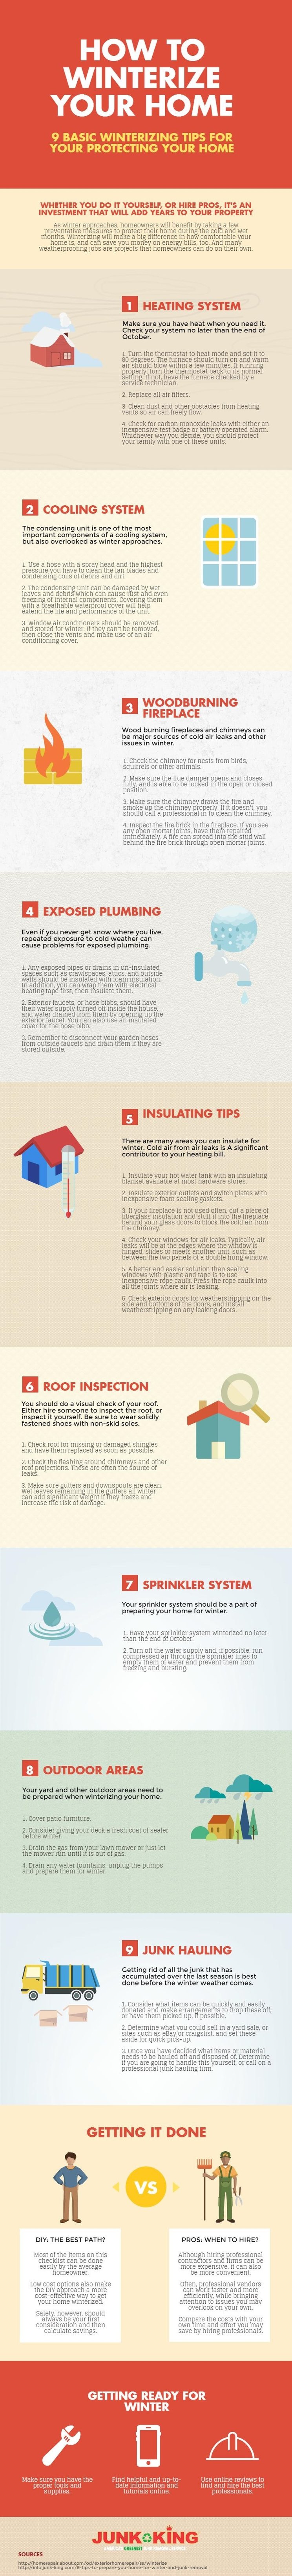 junk-hauling-and-winterizing-your-home-infographic